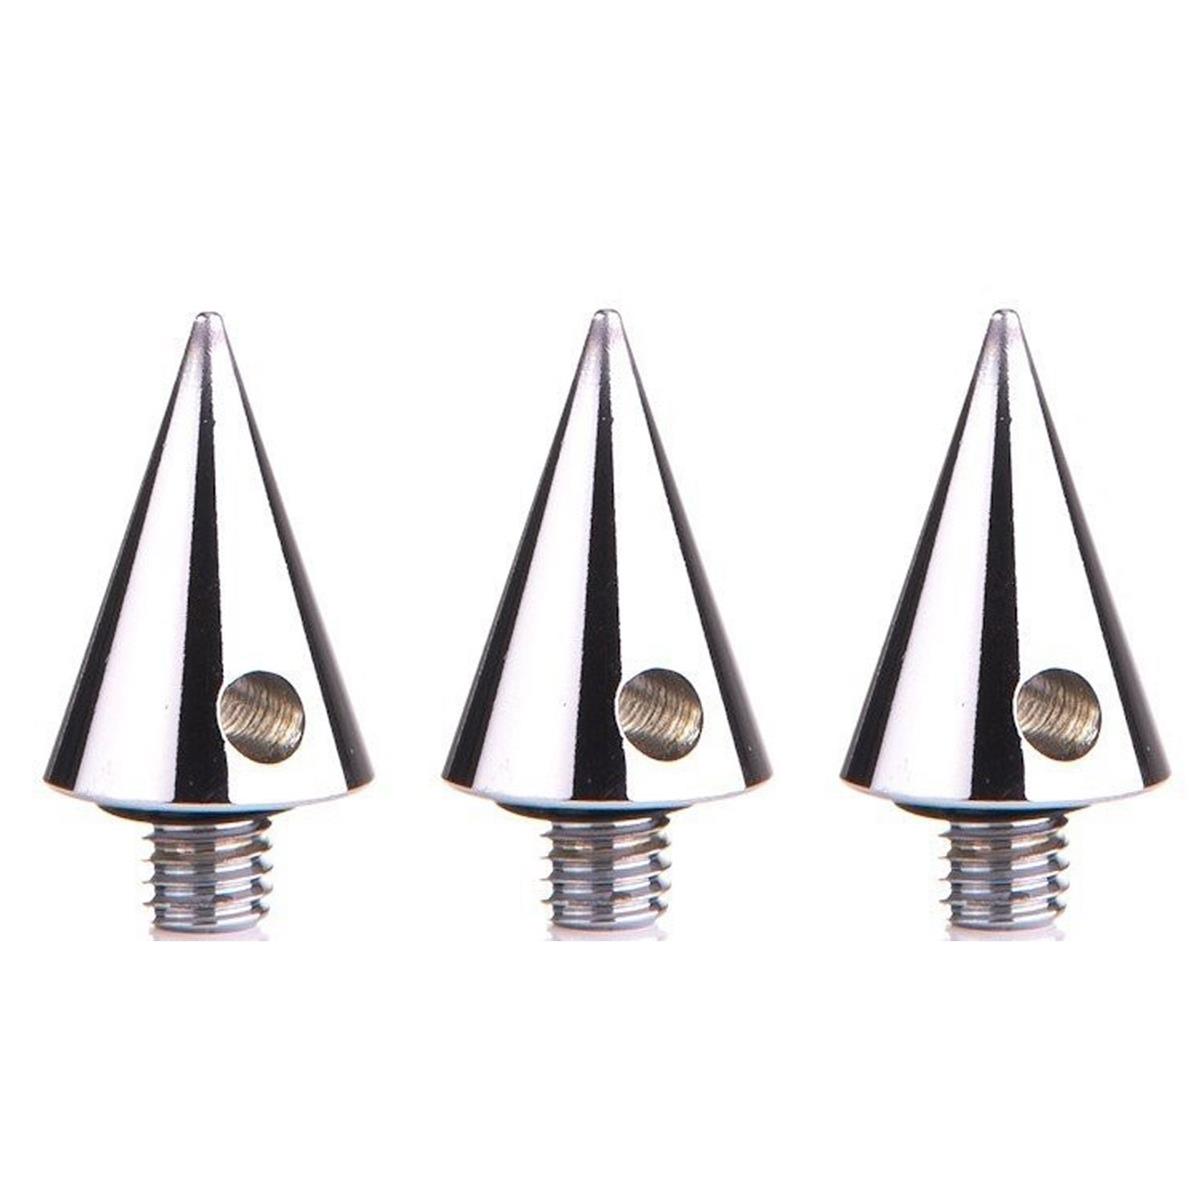 Image of 3 Legged Thing Legends Heelz Standard Stainless Steel Spike Feet for Tripods